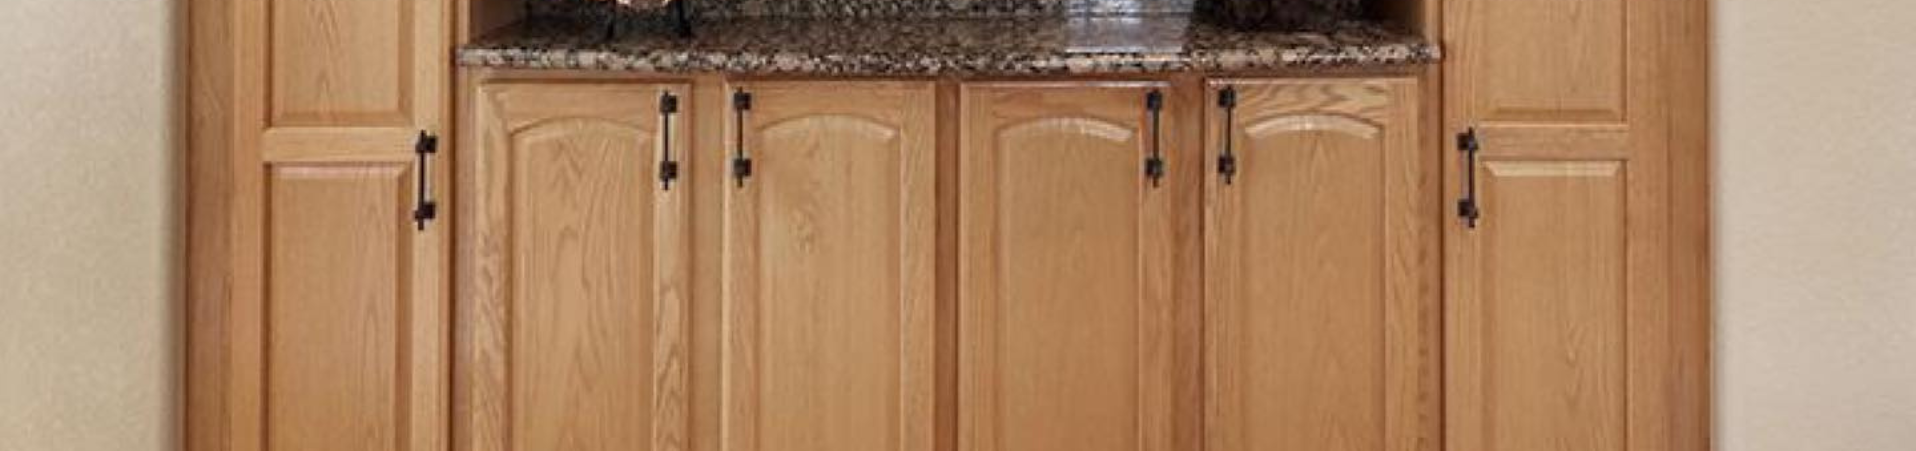 Photo of kitchen with old cabinets before refinishing